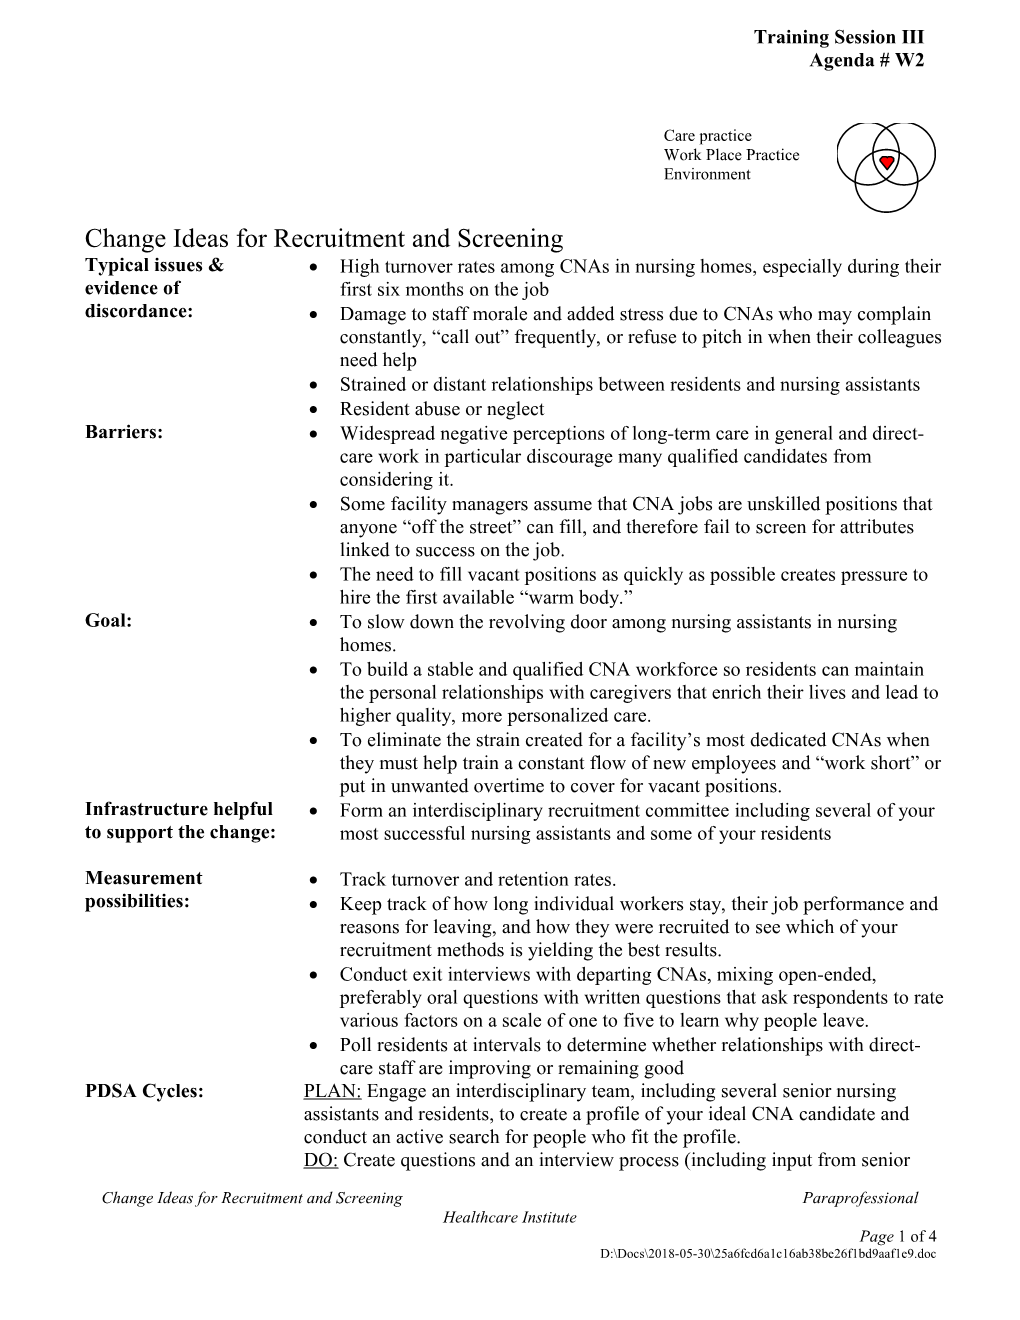 Change Ideas for Recruitment and Screening Paraprofessional Healthcare Institute